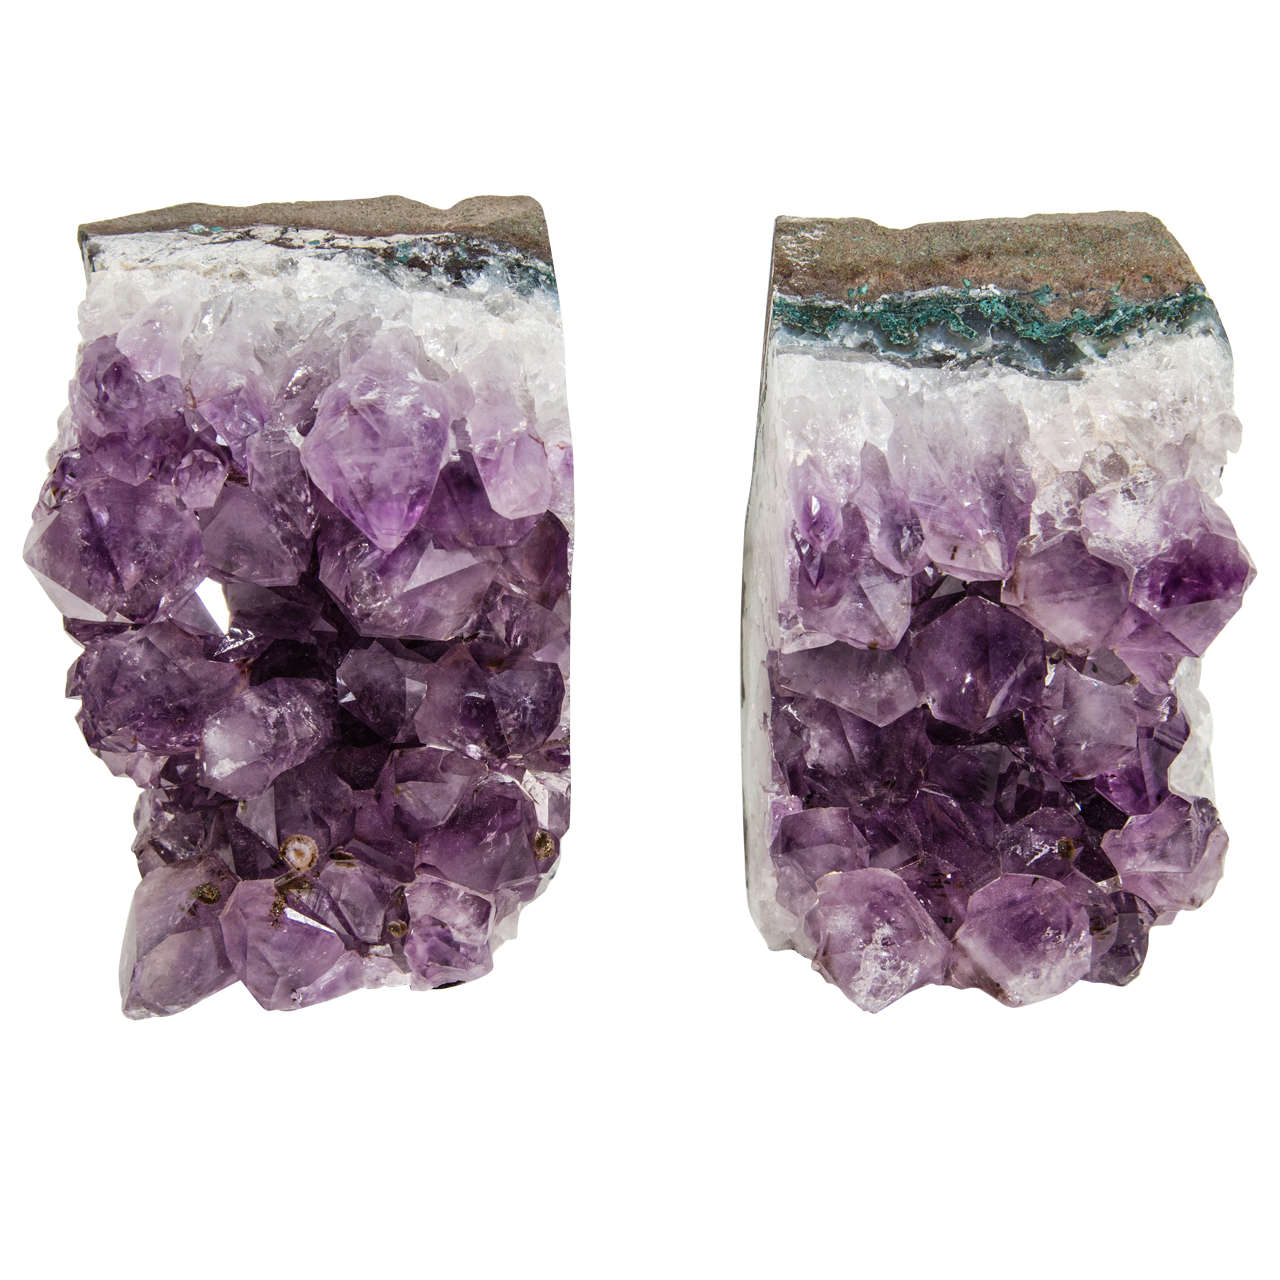 Pair of spectacular crystal amethyst bookends with wedge block cut.  The specimens features polished sides with rough edges in hues of slate and green stone, with protruding chunks of quartz.  They are gorgeous from all angles and can be used in a